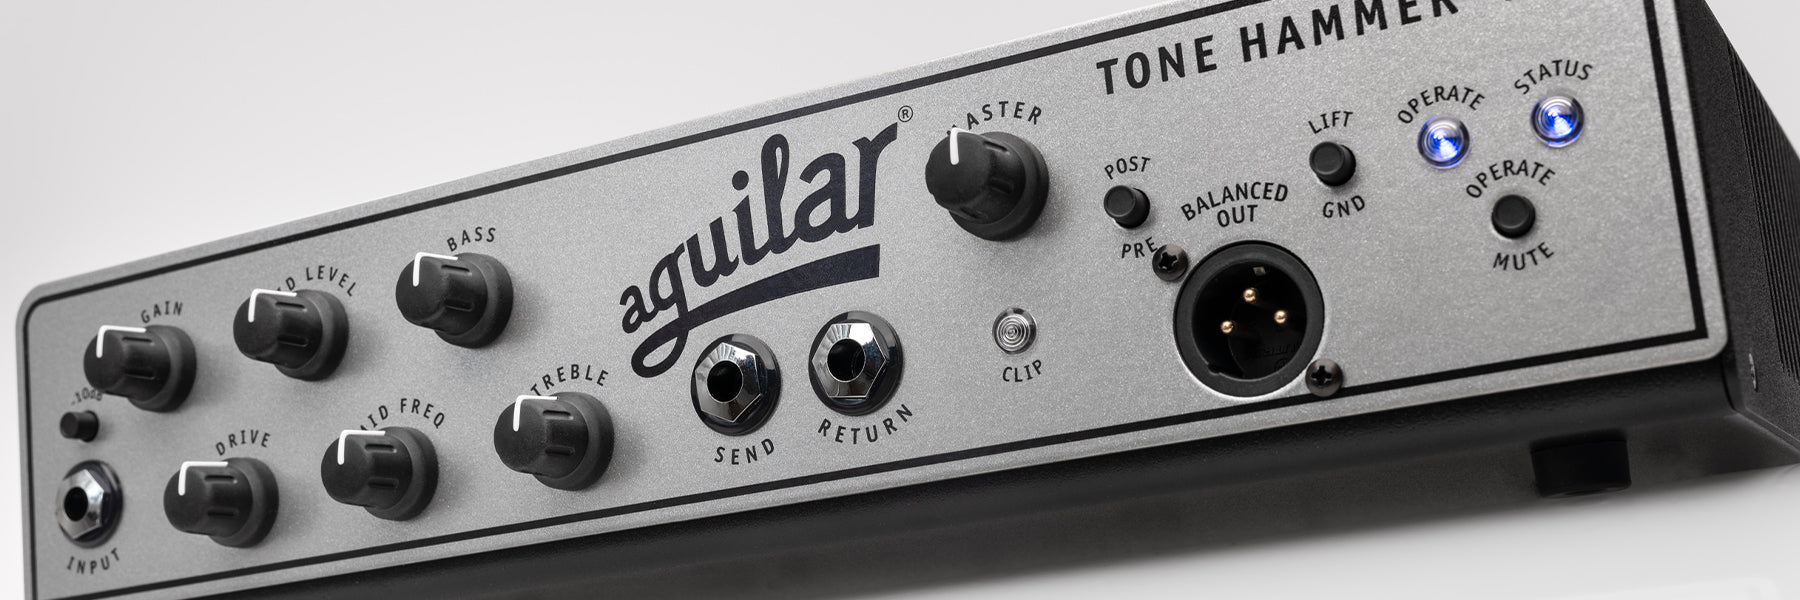 Aguilar TH700 bass amp front closeup on a solid background